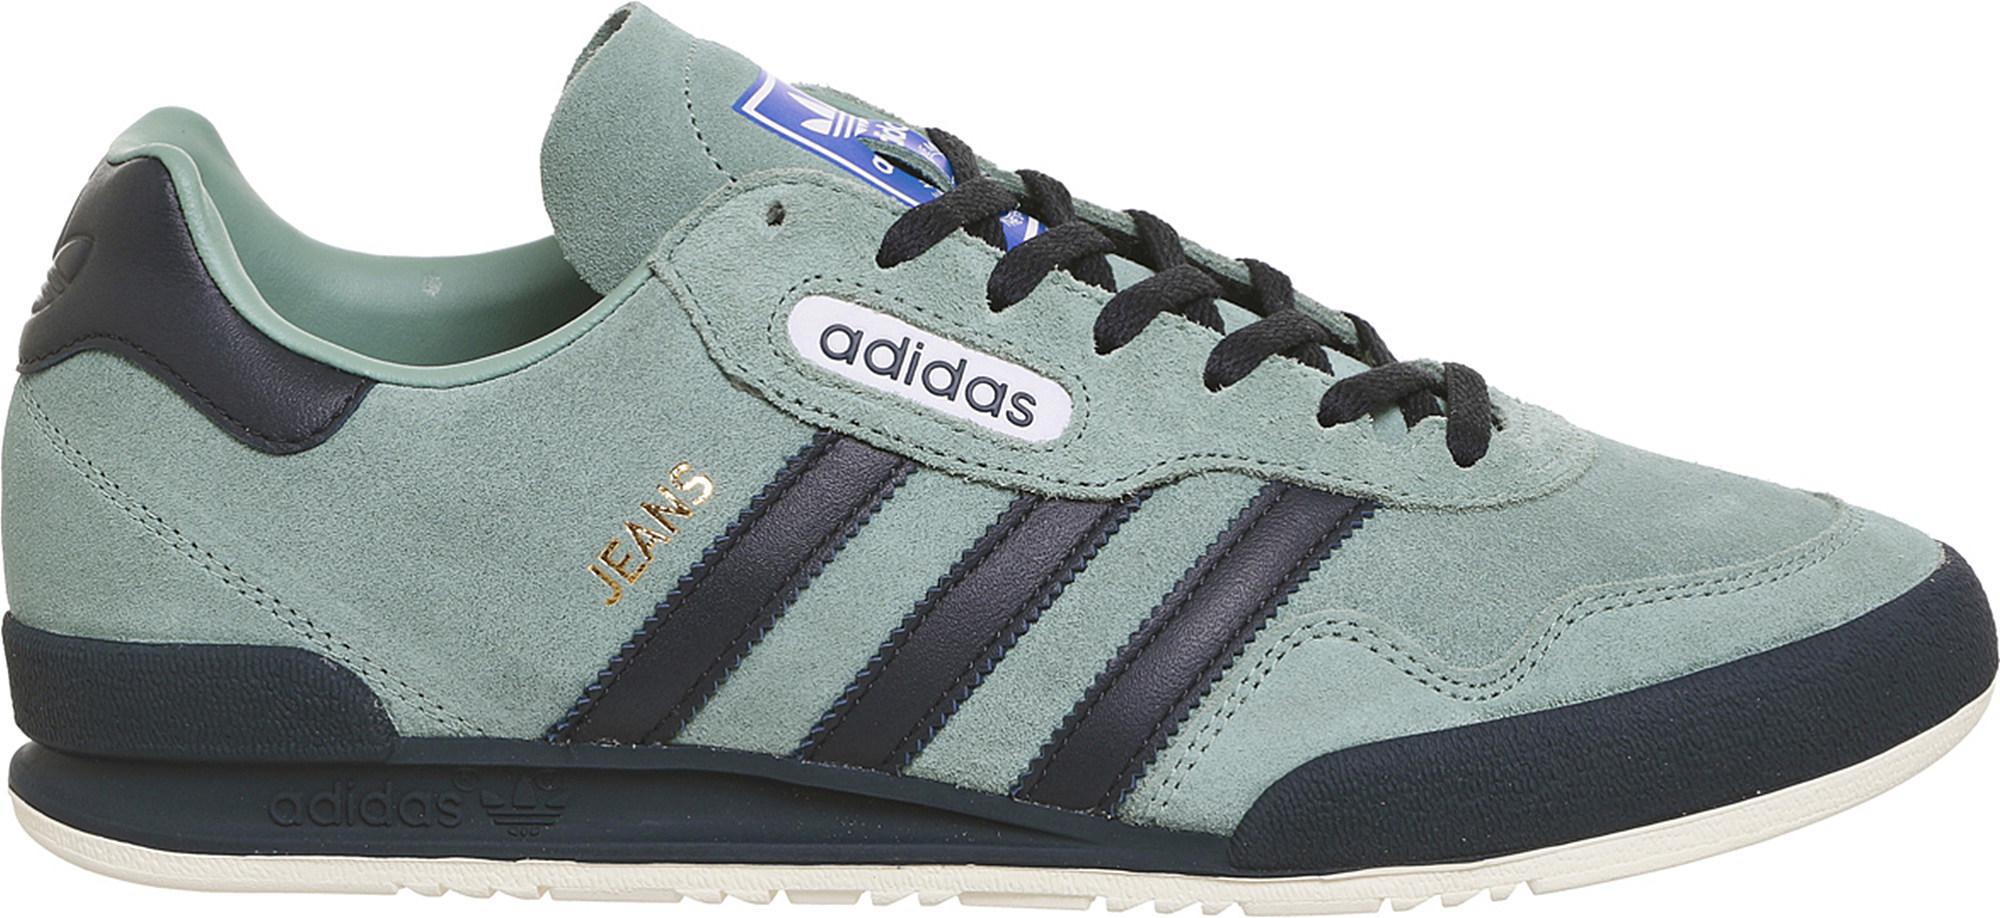 grey and blue adidas jeans